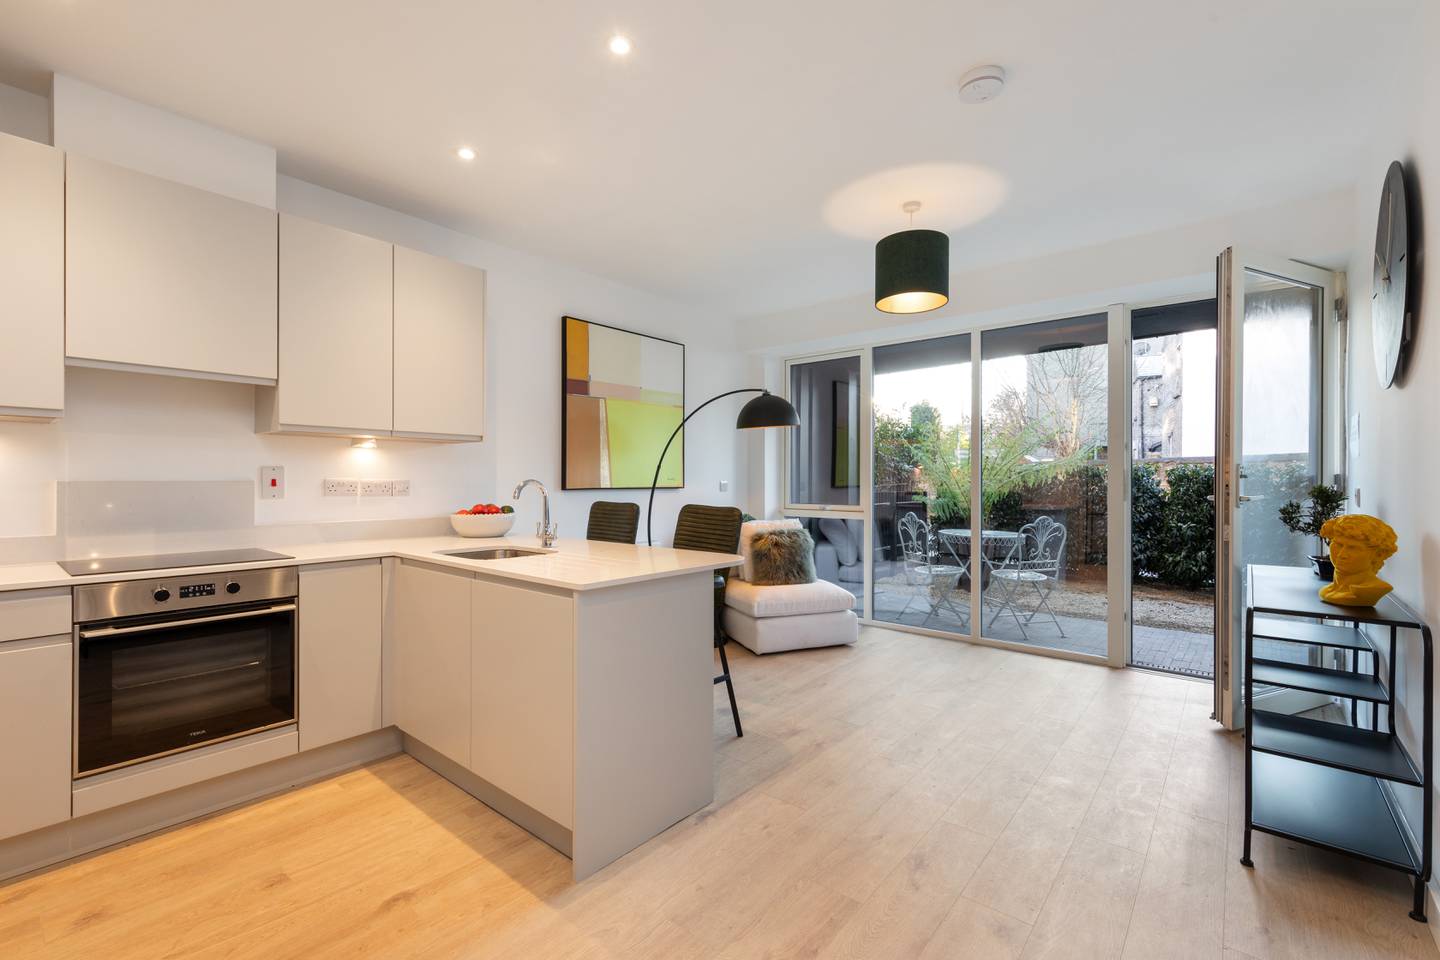 New apartments on Victorian row in Ranelagh with one-beds from €495,000 ...